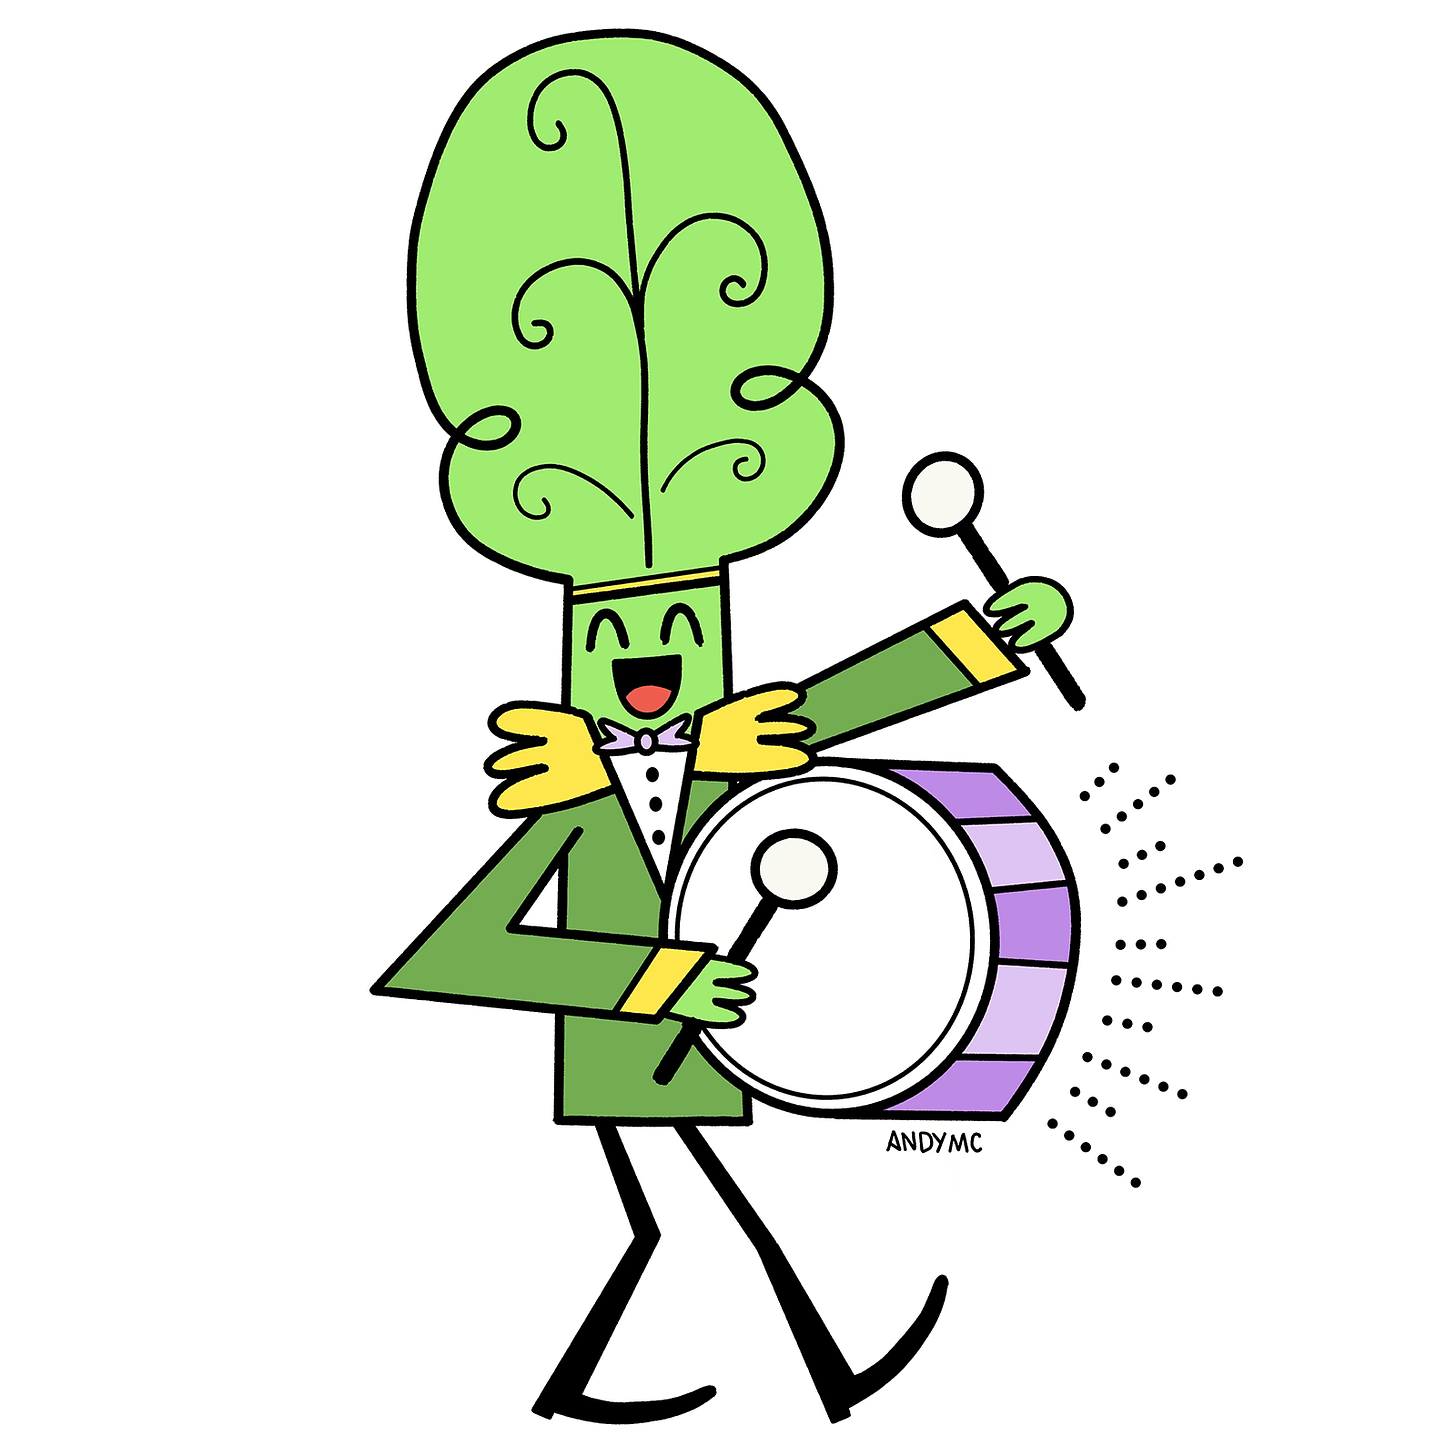 An illustration of a collard green playing a drum.